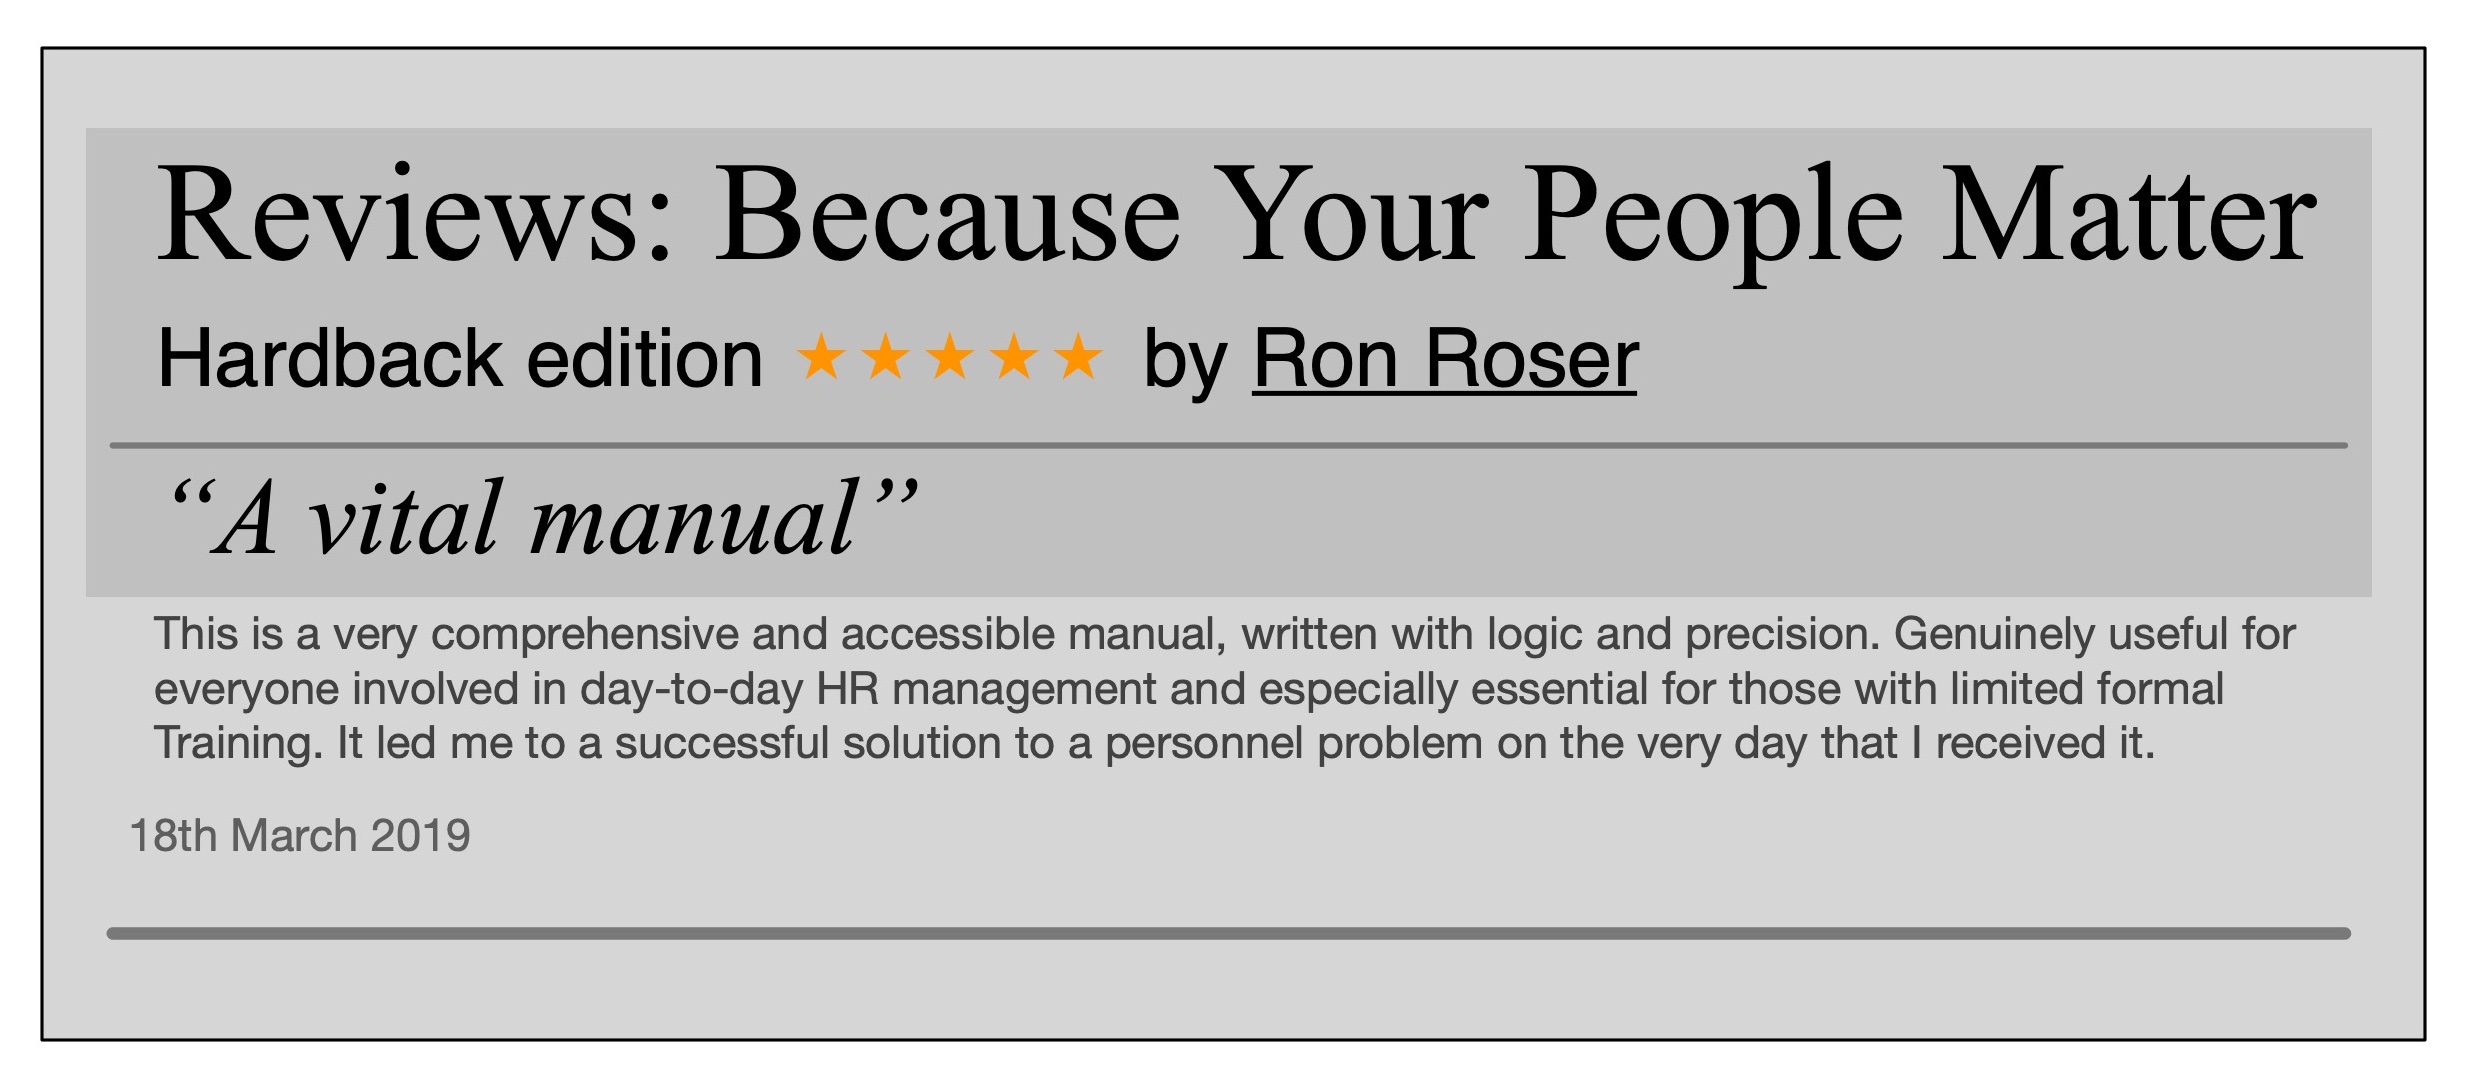 Reviews as images Ron Roser5